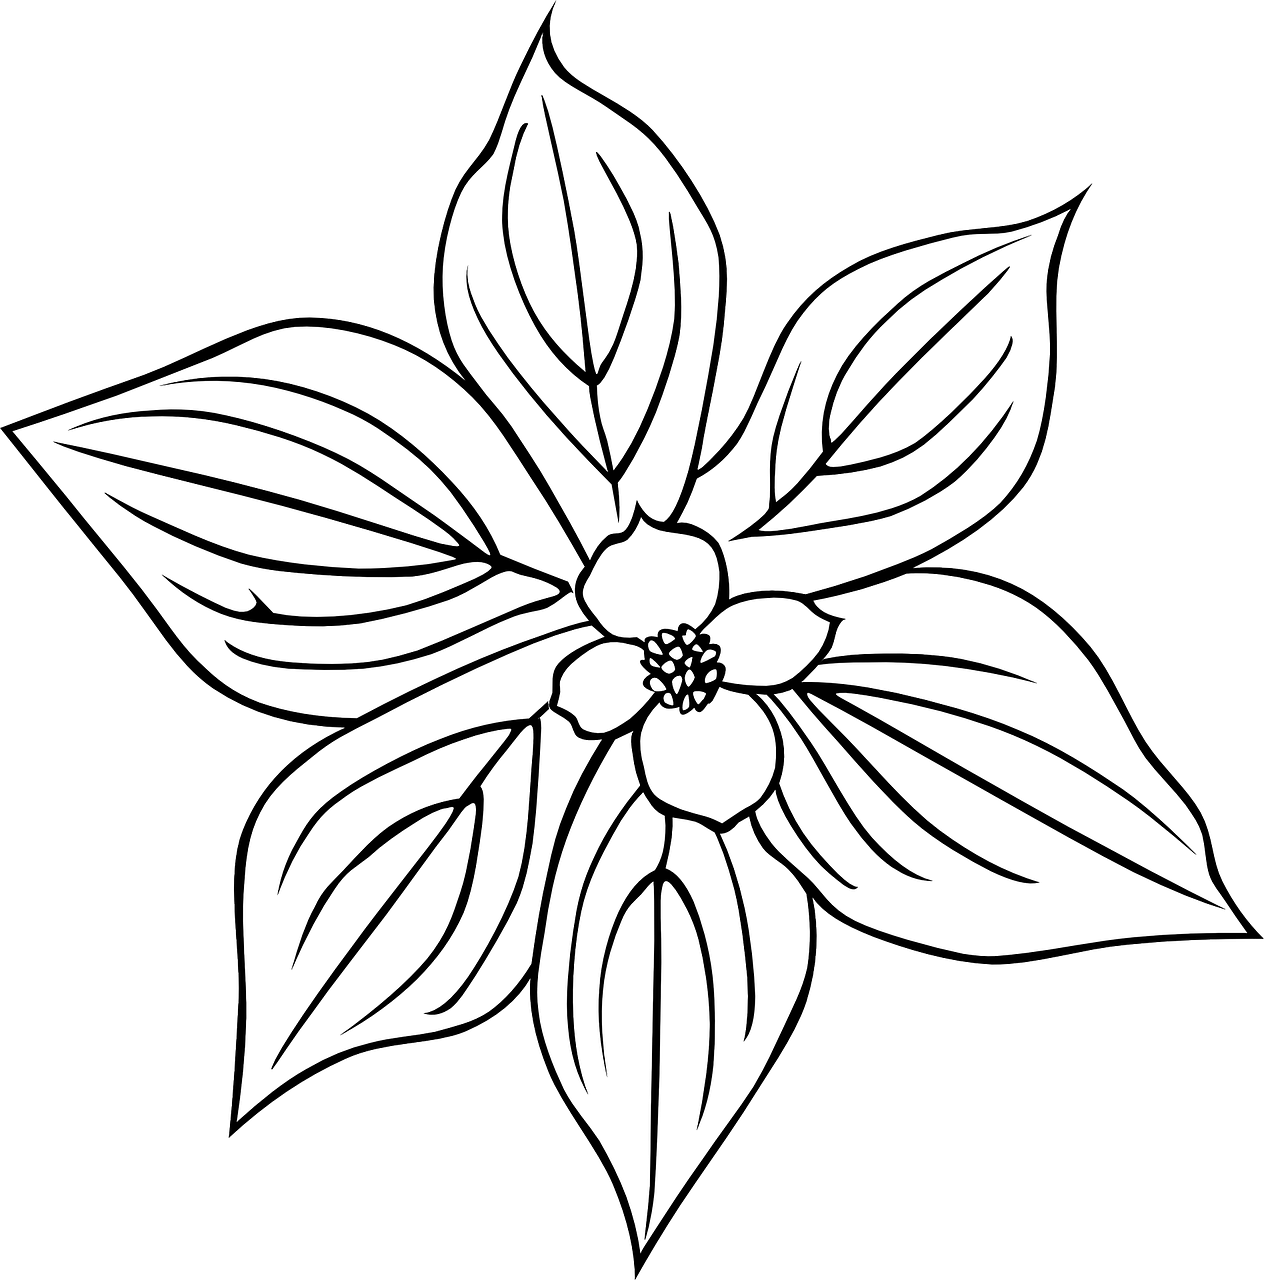 leaves,flower,black and white,blooming,blossom,floral,small,patterns,leaf,free vector graphics,free pictures, free photos, free images, royalty free, free illustrations, public domain